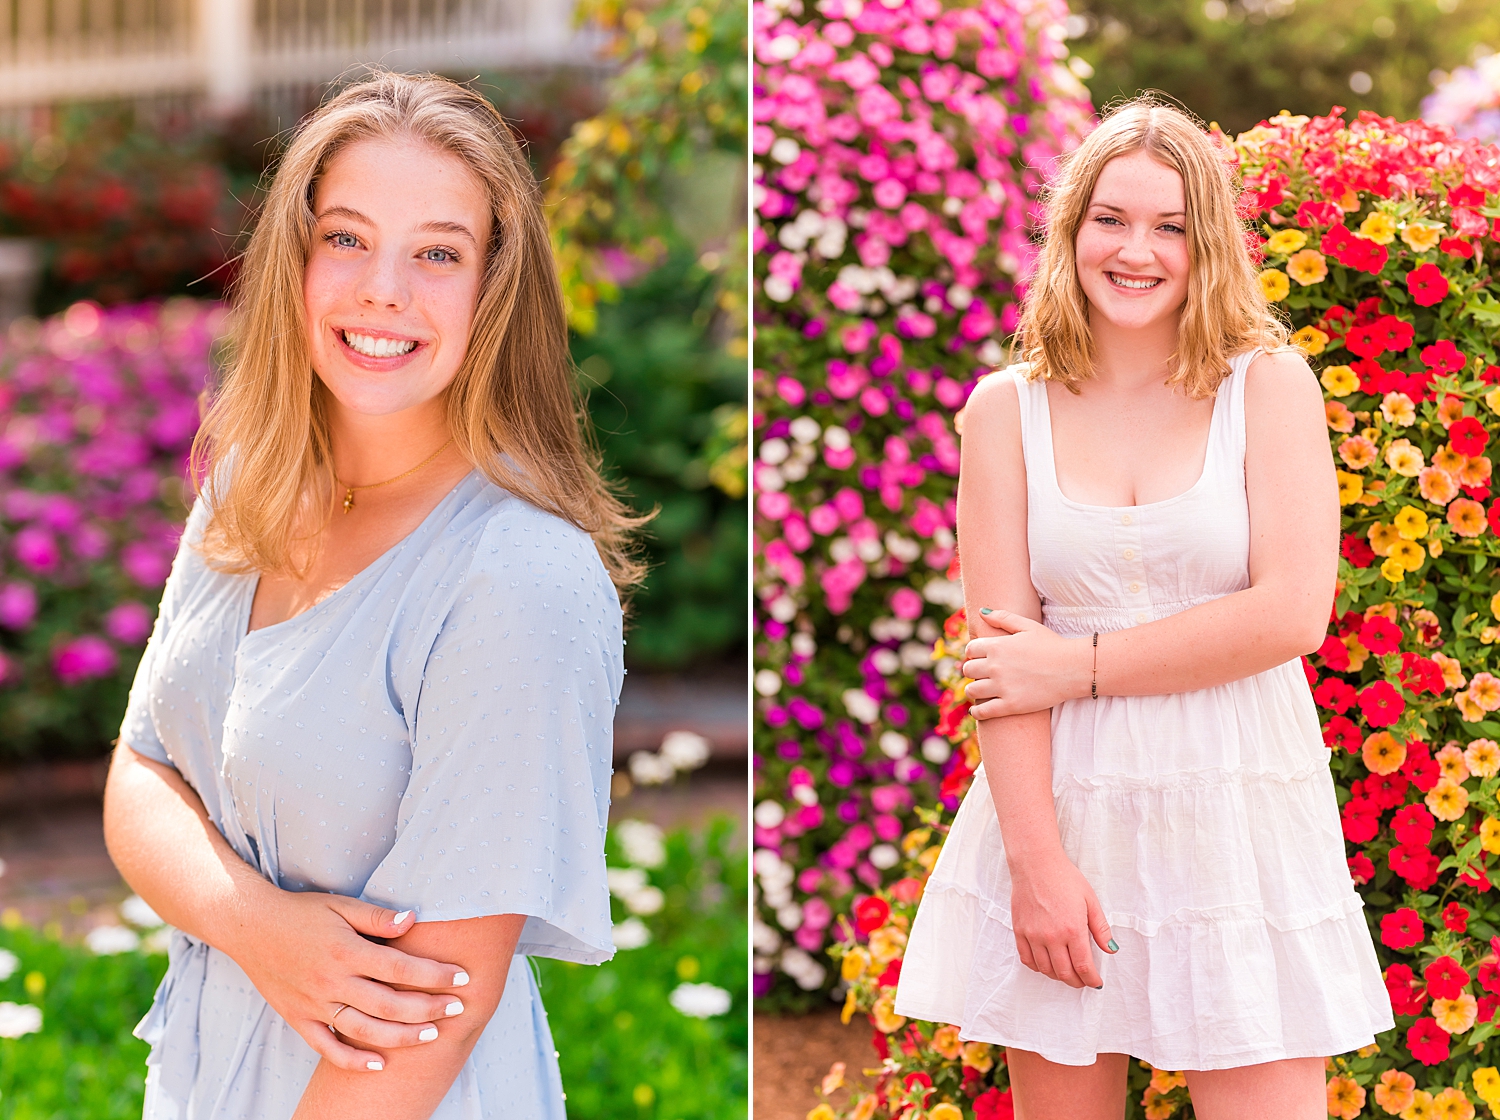 New Hampshire Senior Sessions in front of colorful flowers in garden